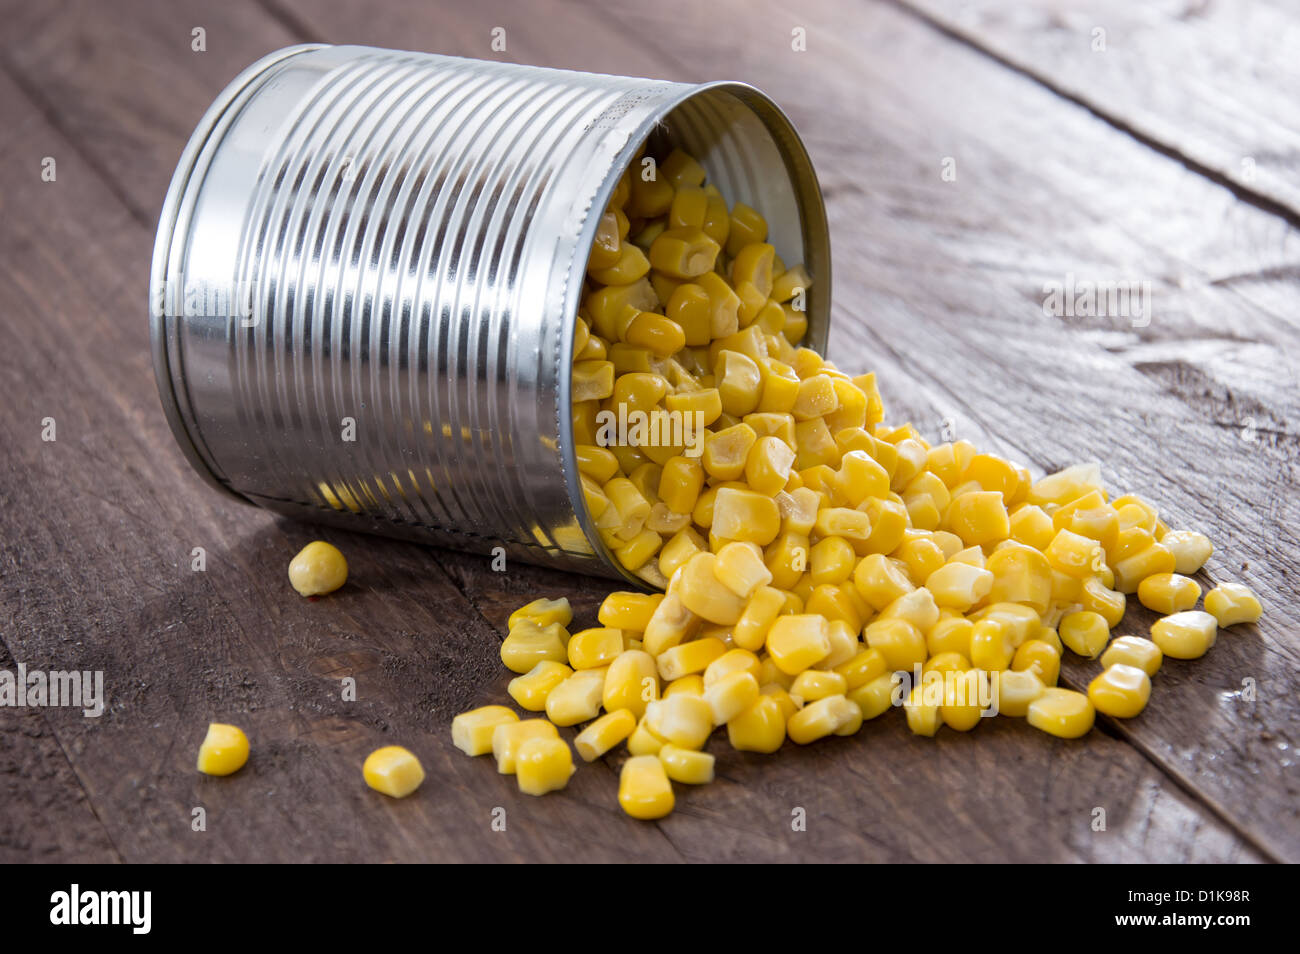 Canned Corn on wooden background Stock Photo